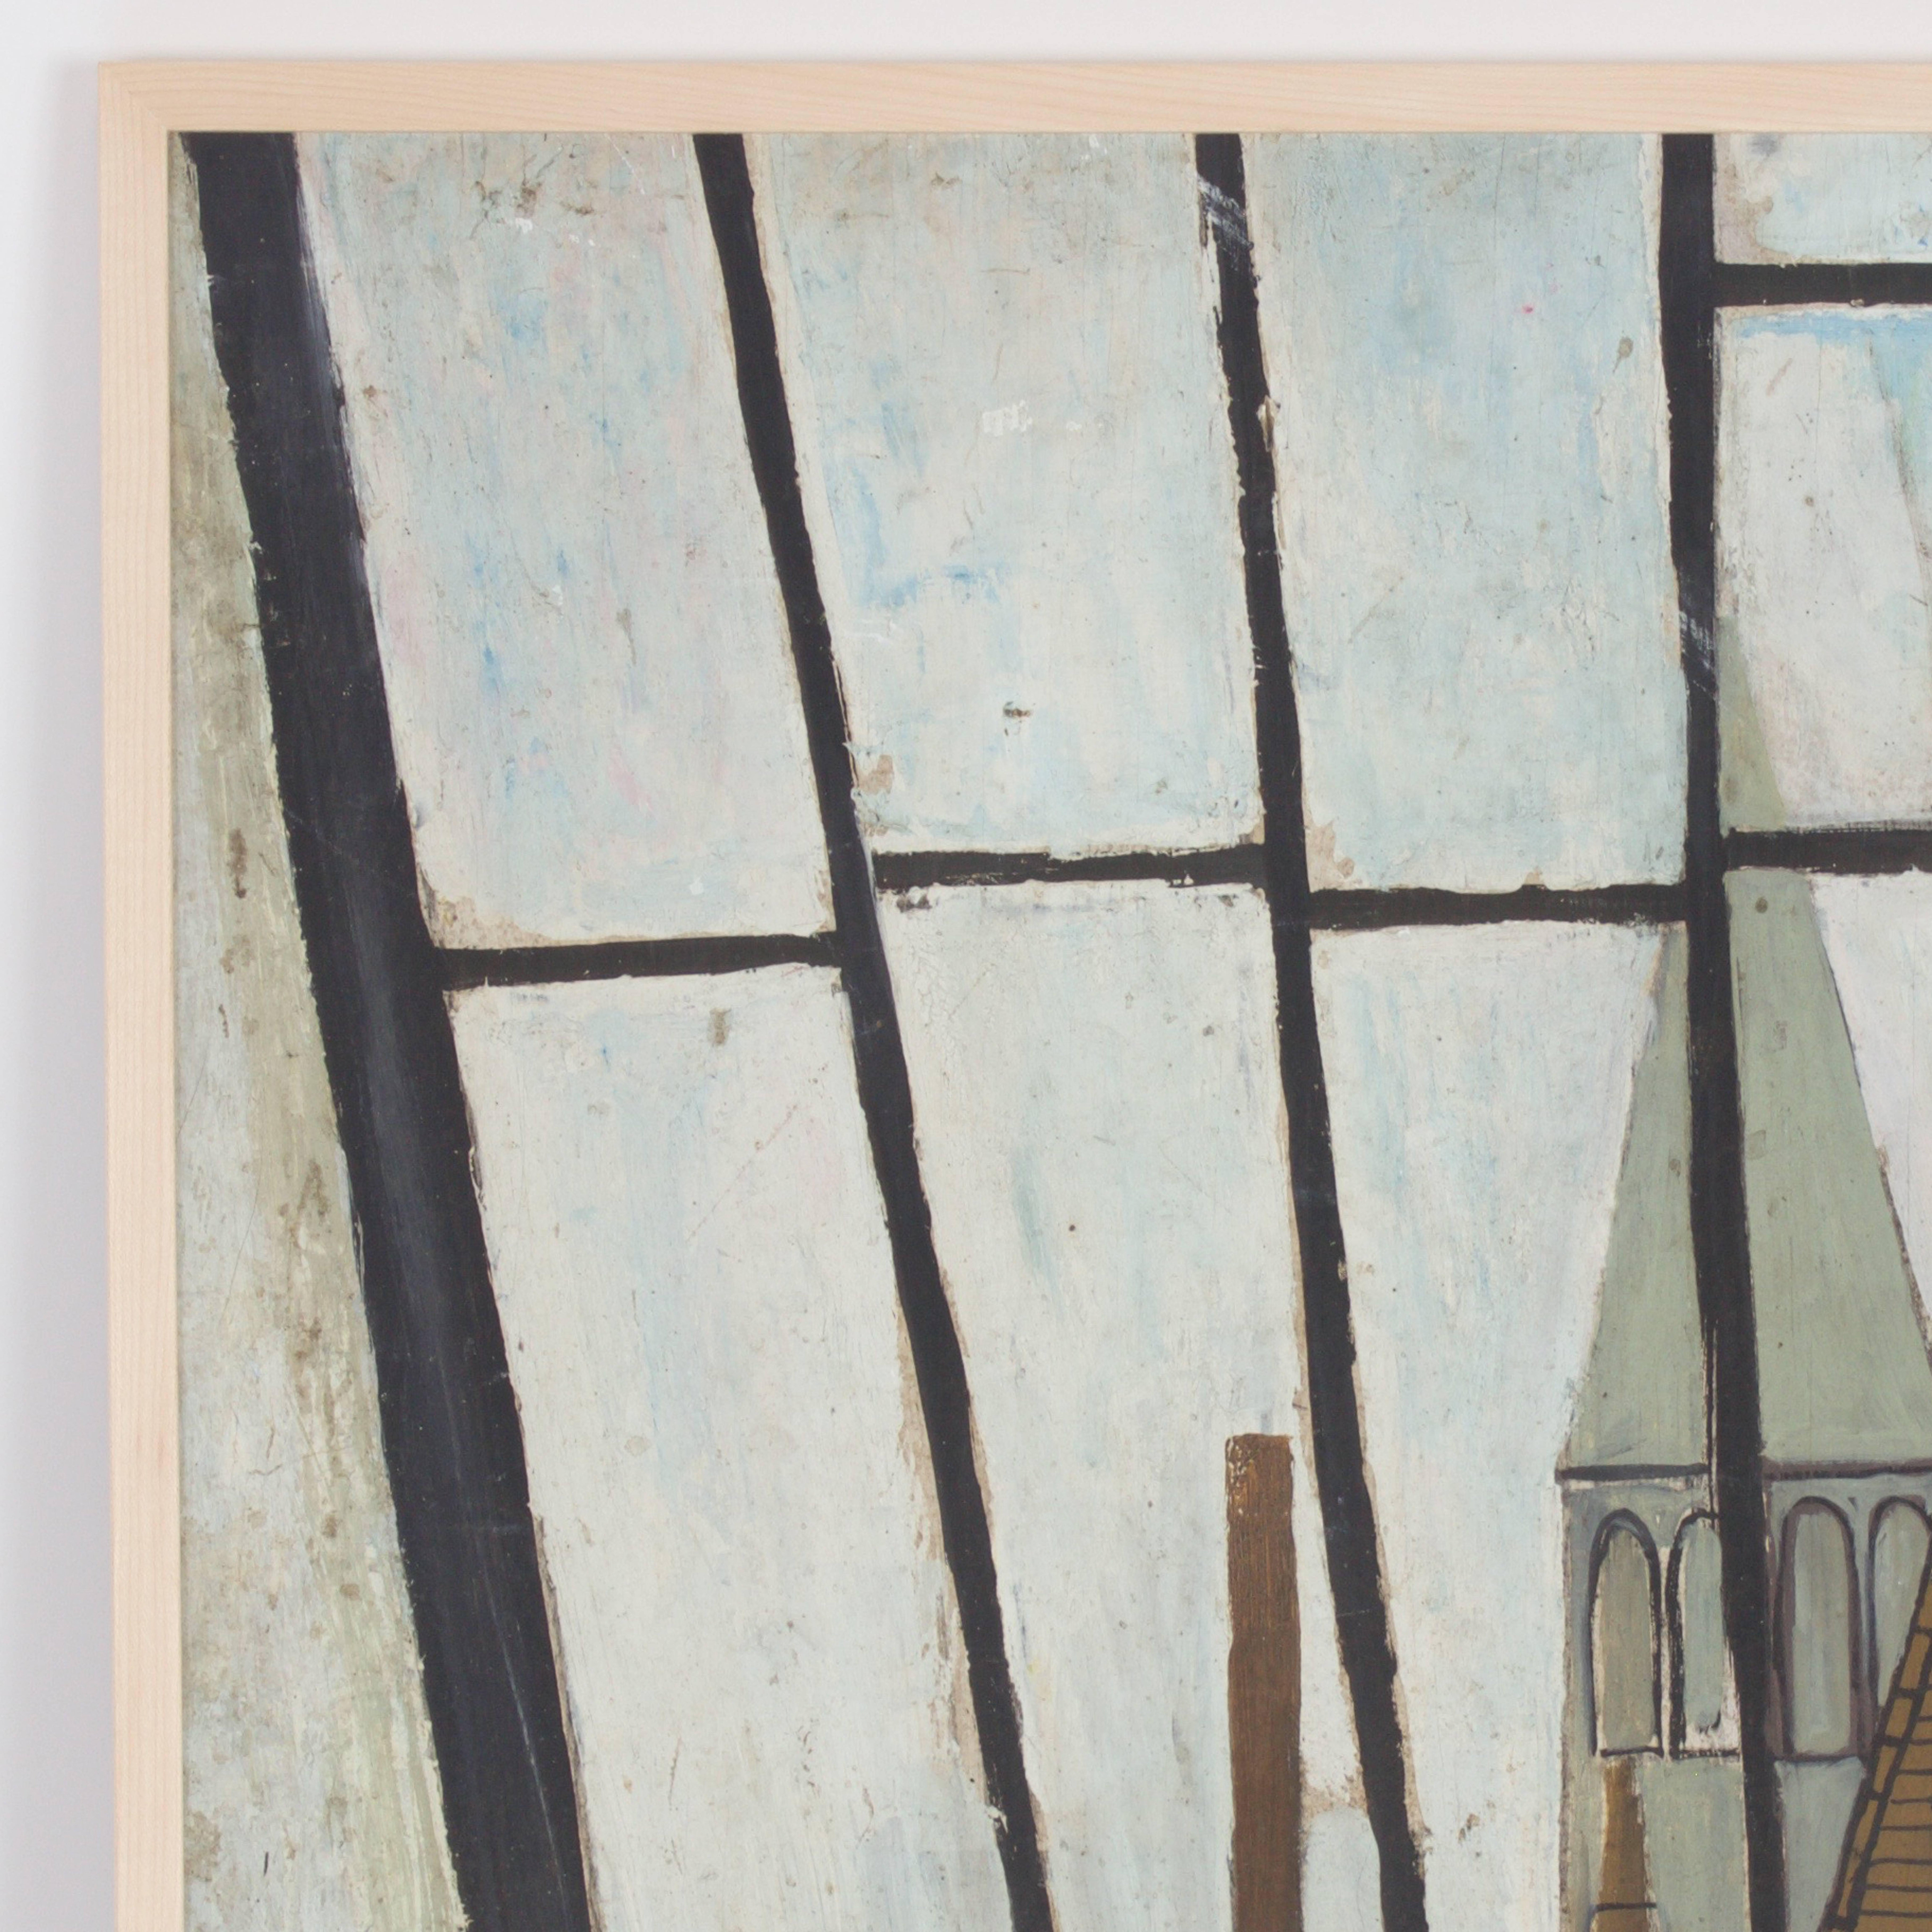 Here is a midcentury oil painting on board that typifies the cliched Parisian artist's studio, complete with a skylight view of church steeples on a cloudy day. One of six recently acquired Robert Blanchard paintings in our inventory.

 